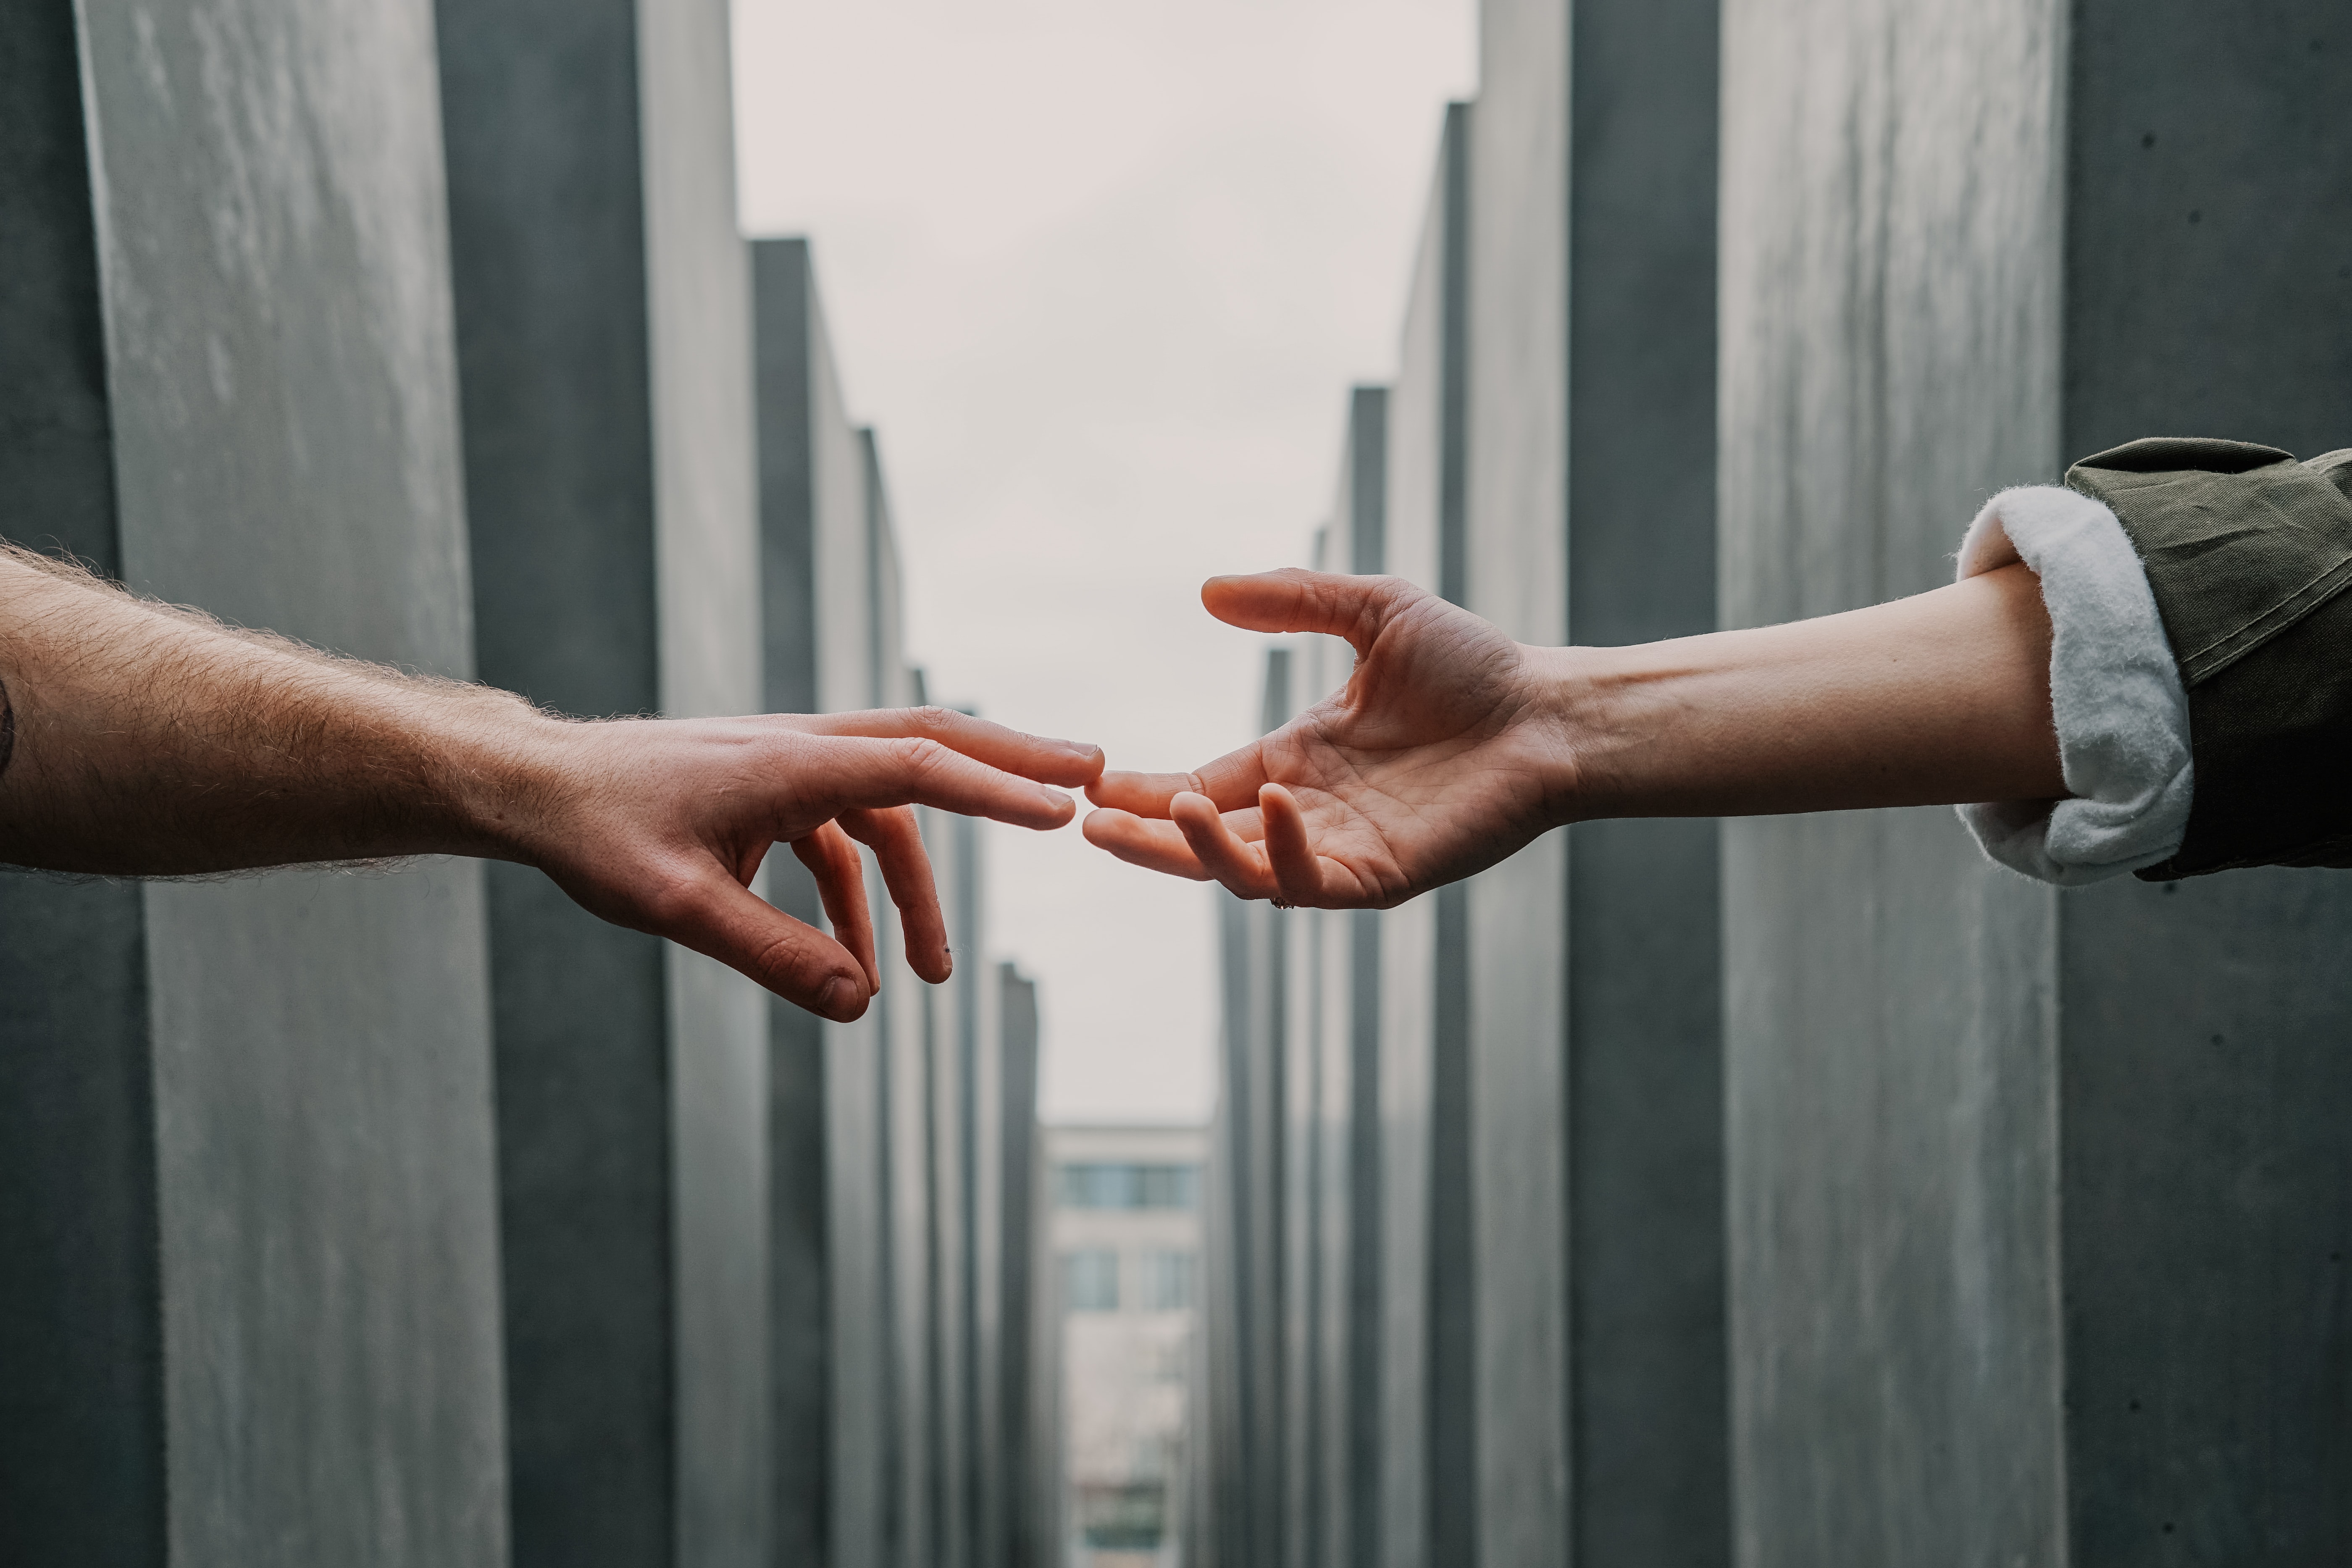 hands reaching for each other, fingers just touching, with grey block stones in the background